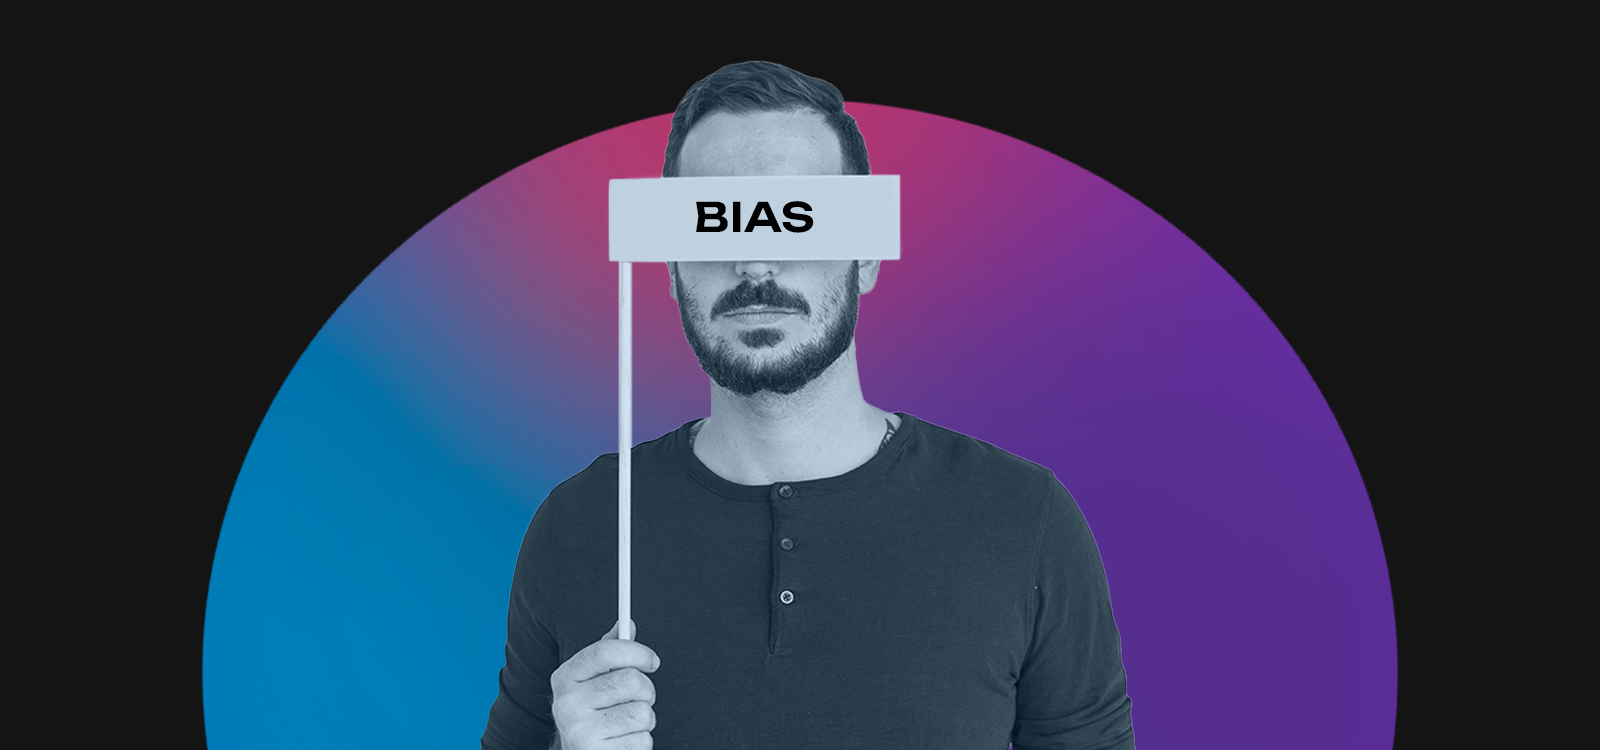 7 Most common unconscious biases in the workplace